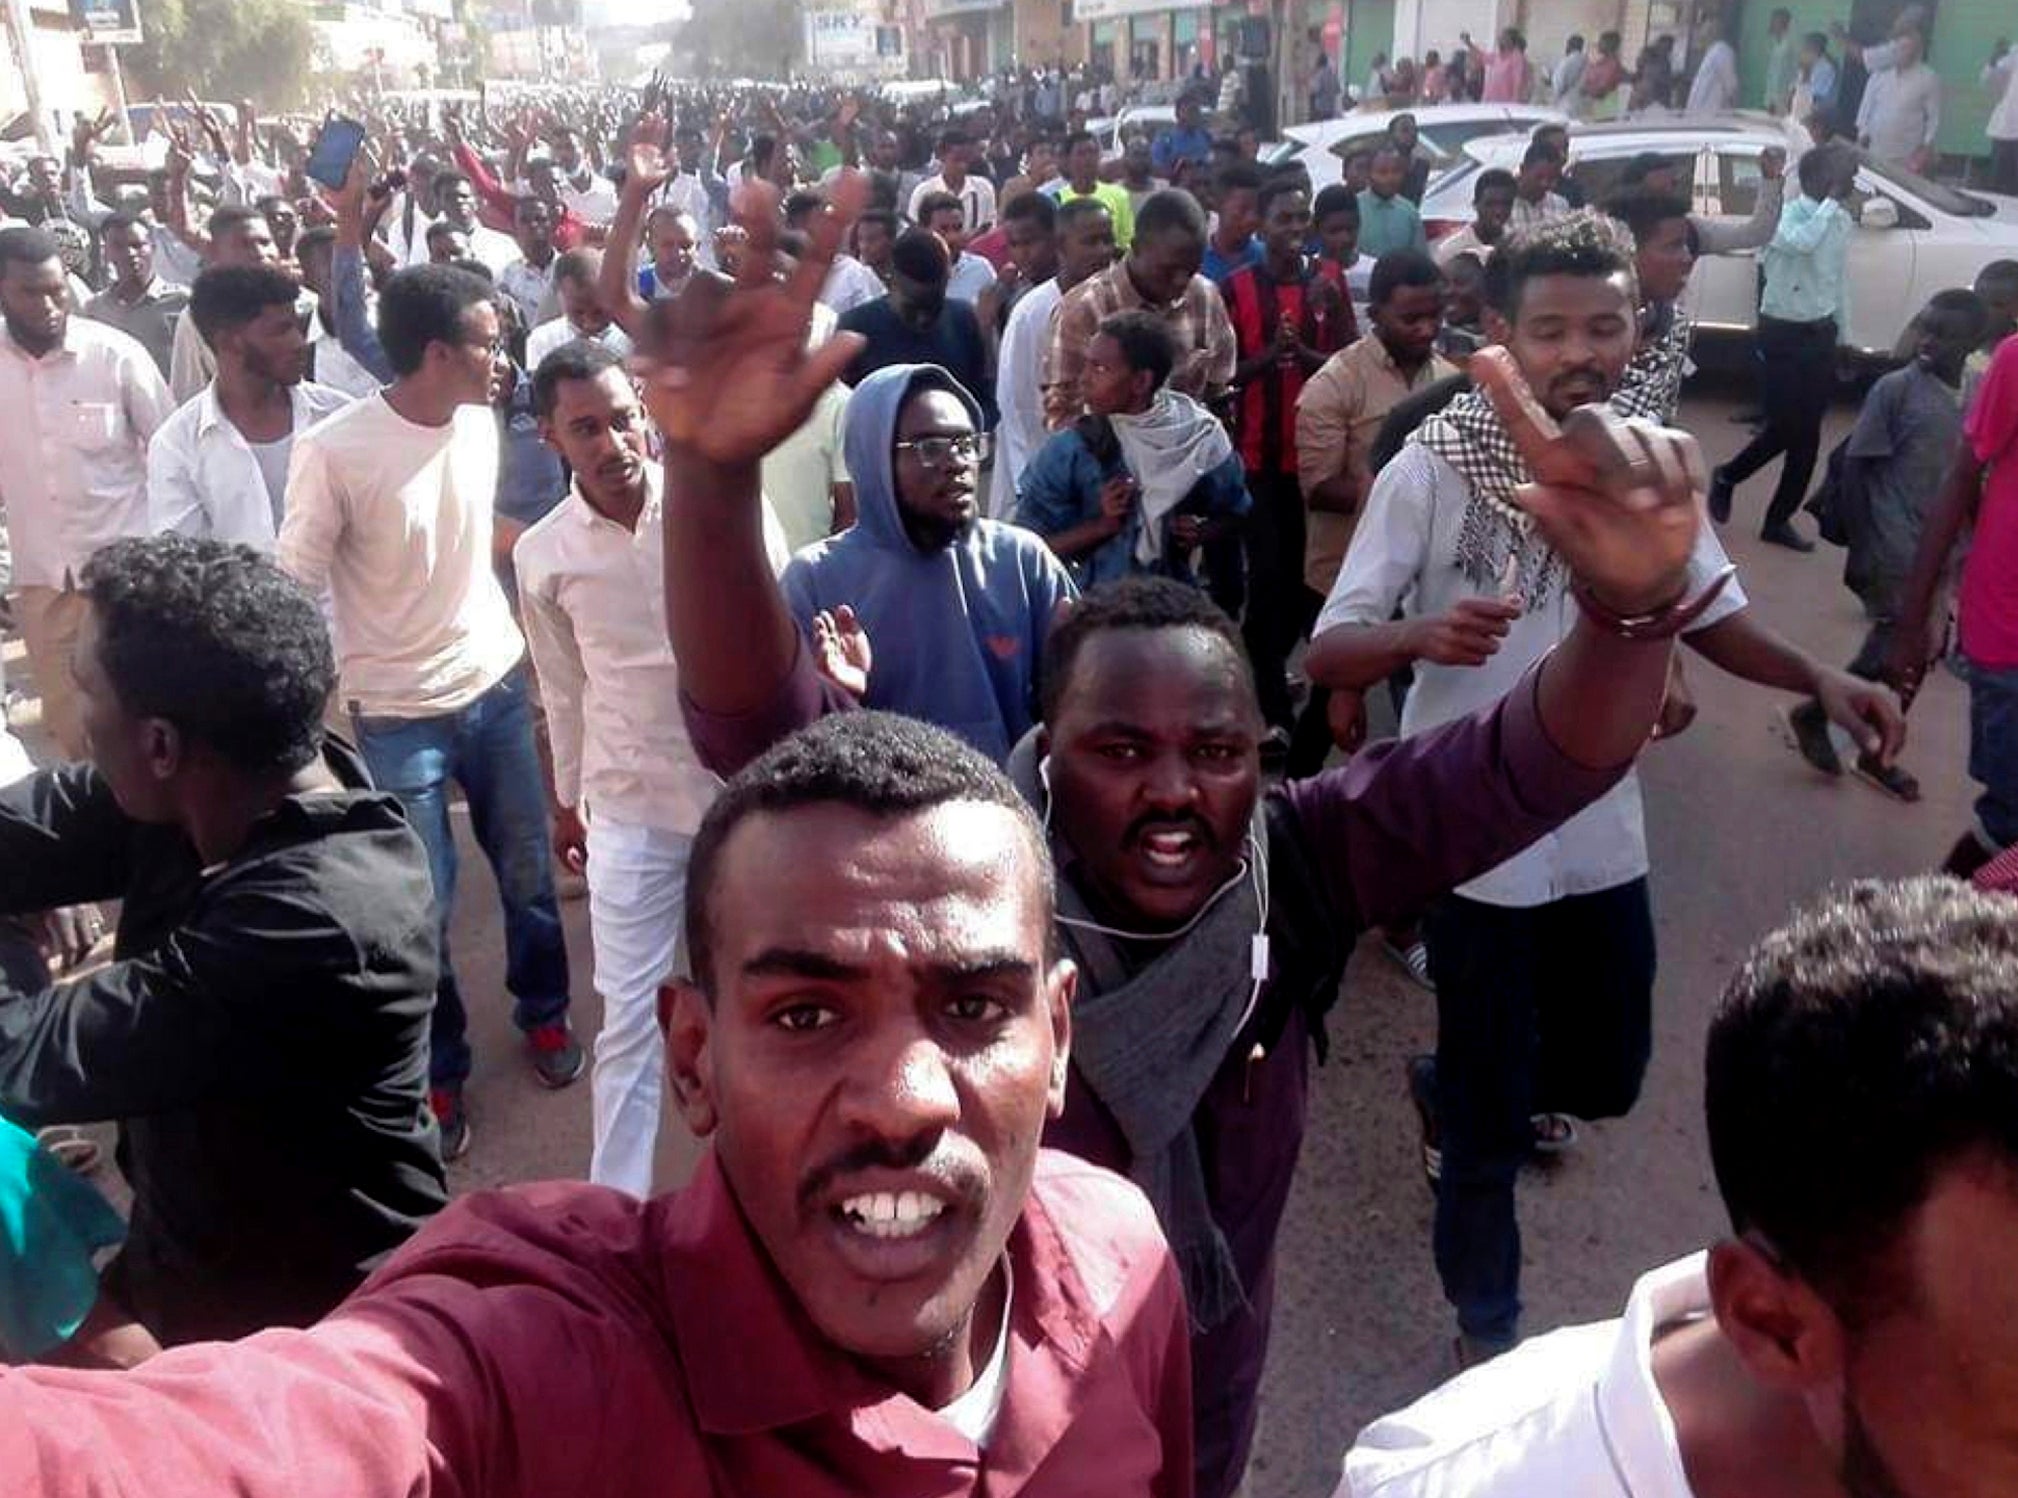 Protesters chant slogans during a demonstration, in Khartoum, Sudan on 20 December.